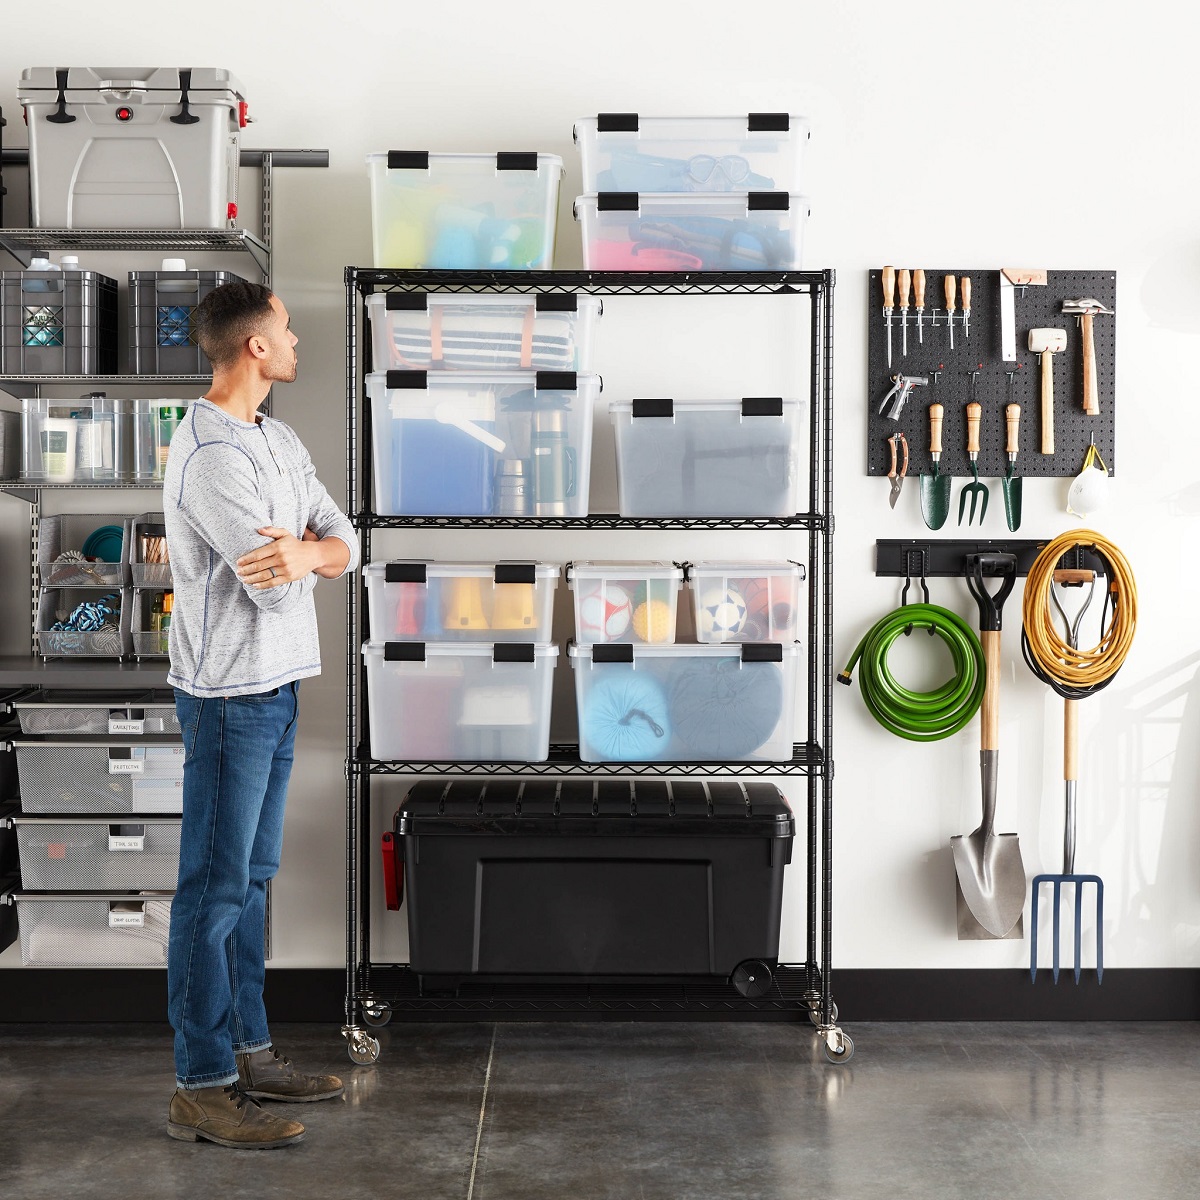 The Container Store - Spring cleaning applies to the whole house. Shop  garage storage & organization at #TheContainerStore: bit.ly/30WpF2D